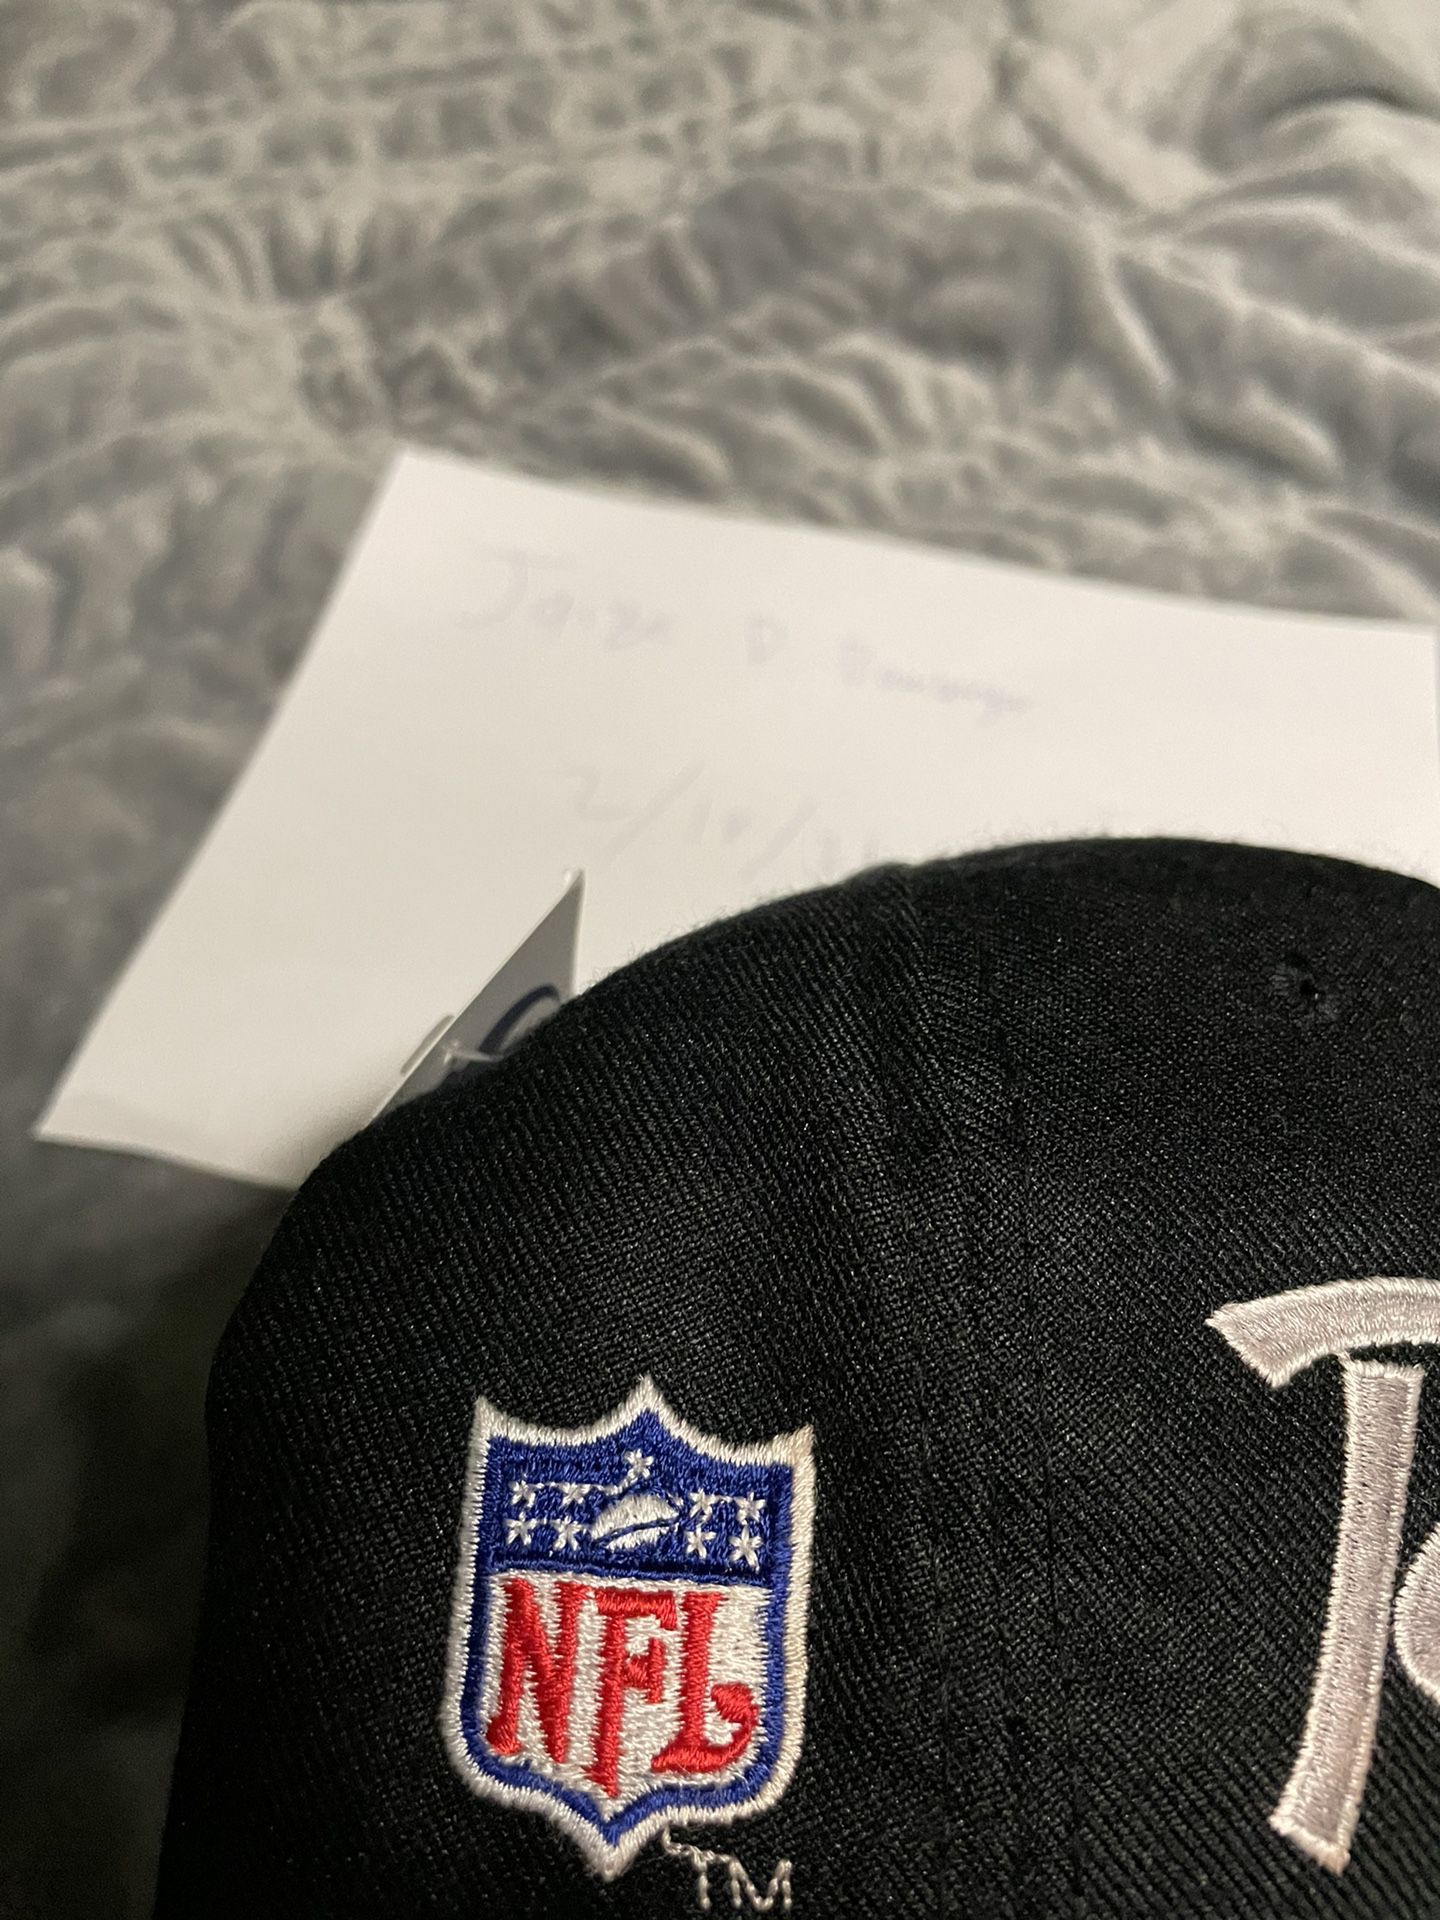 New Era 9fifty Los Angeles Raiders x NWA SnapBack Hat for Sale in  Montclair, CA - OfferUp